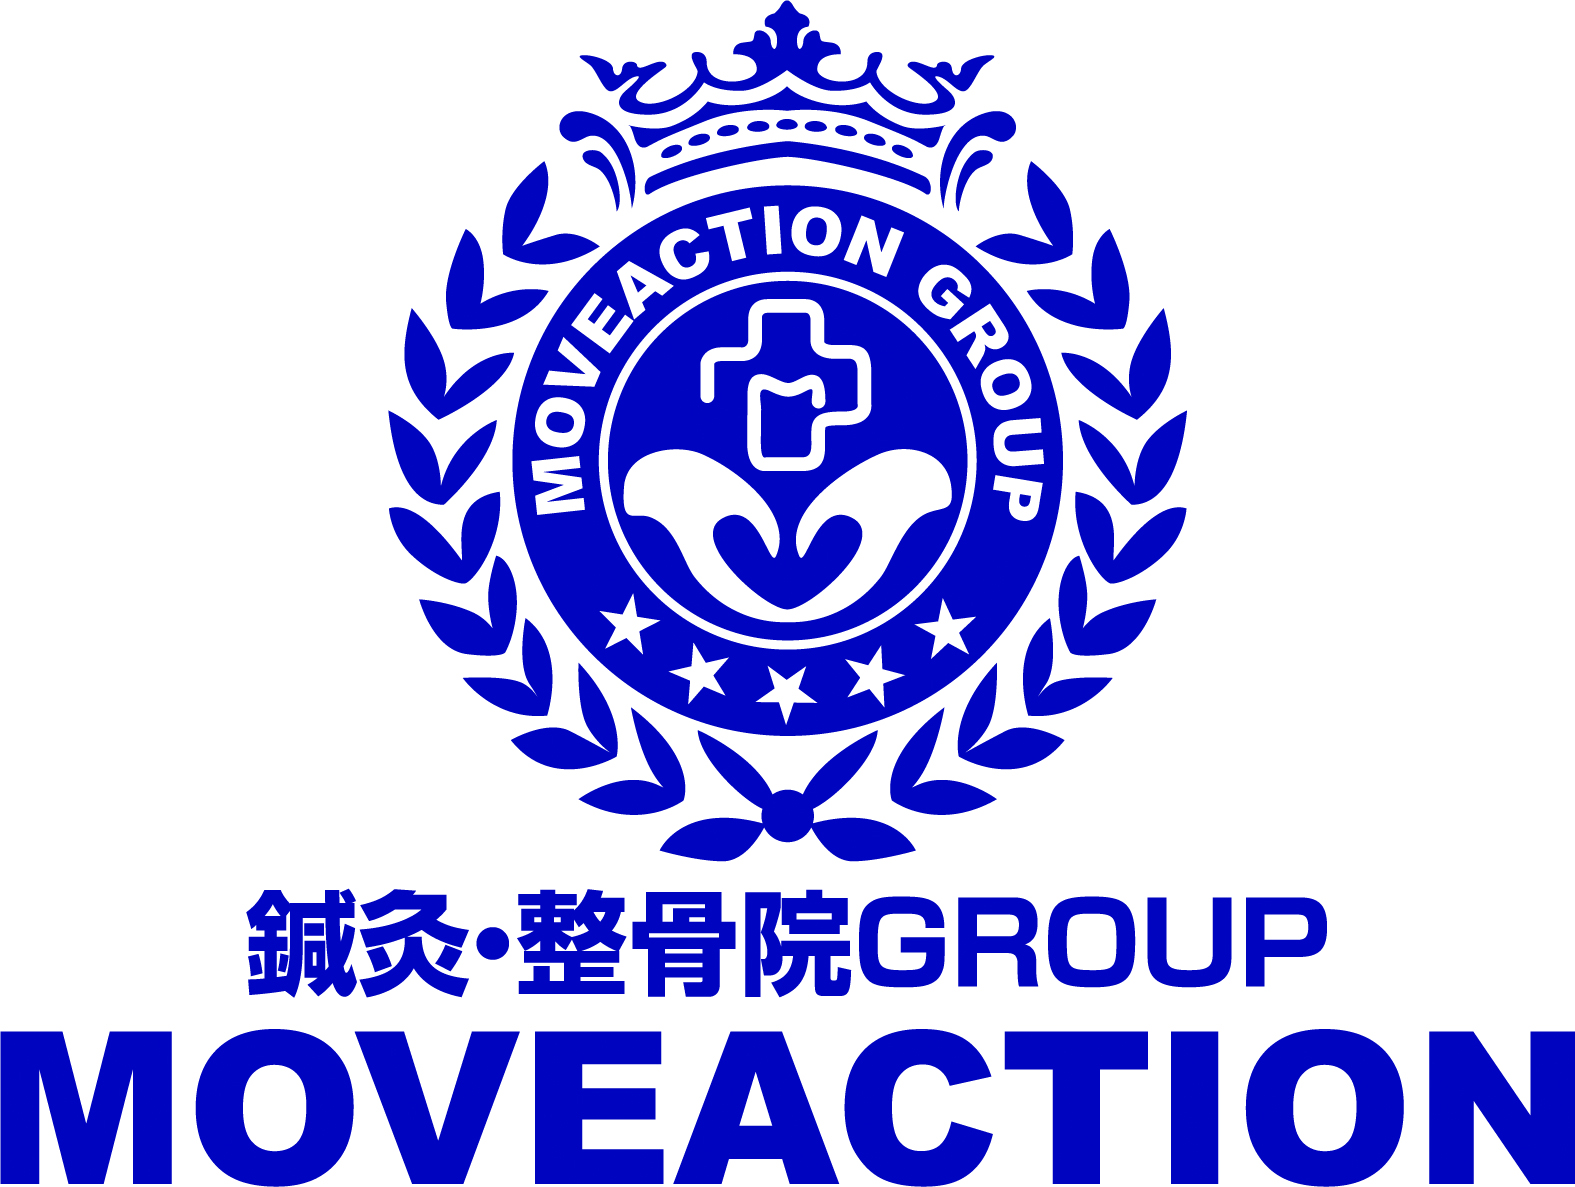 MOVEACTION OnlineShop